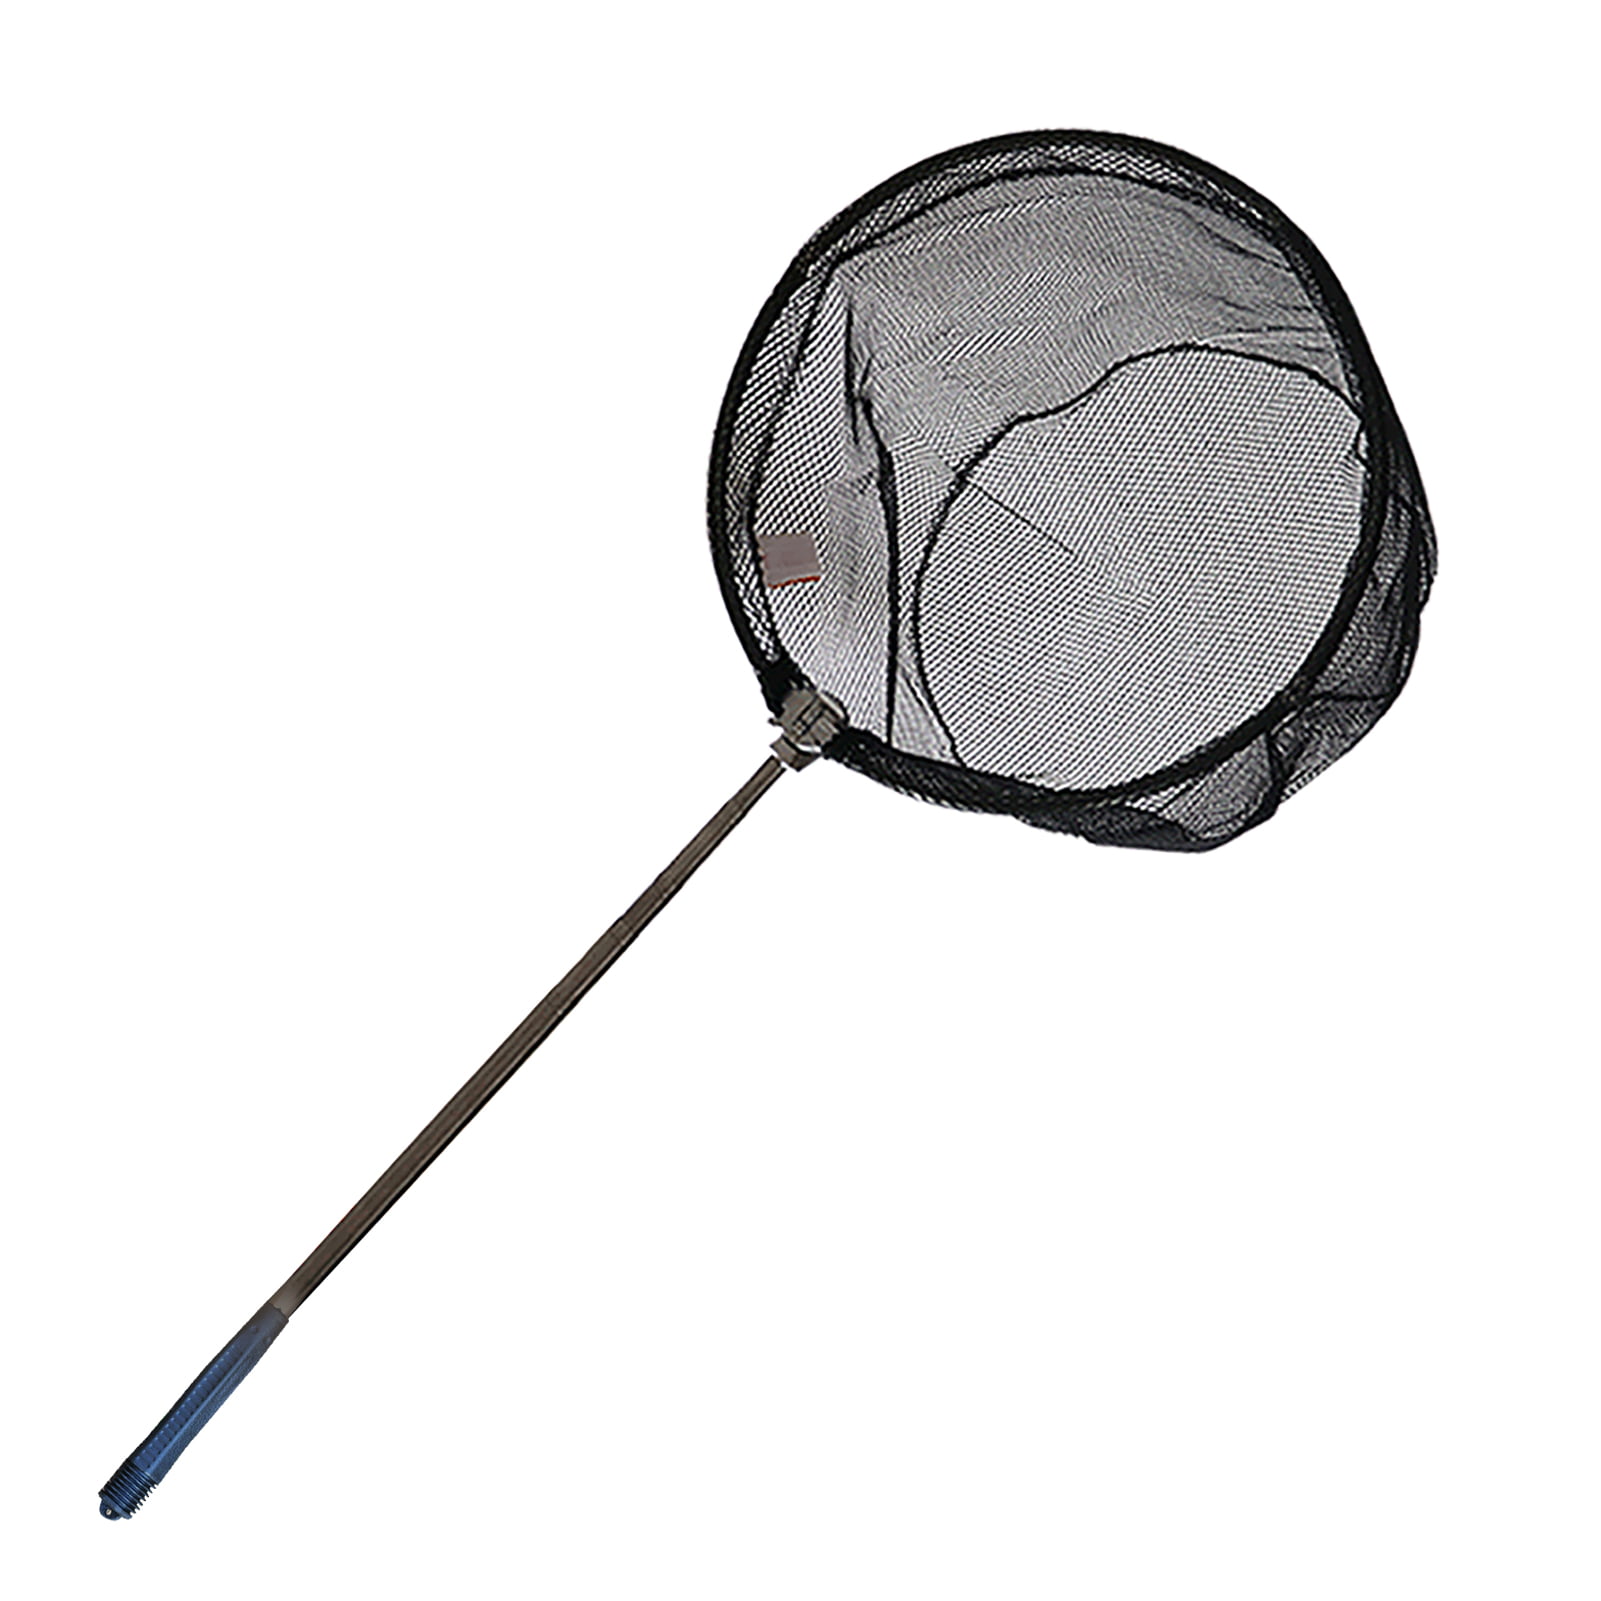 Fishing Net with Floating Fish Landing Net Double-Section Telescopic Aluminum Alloy Pole Handle Fishing Bait Trap Net for Safe Catching and Releasing 